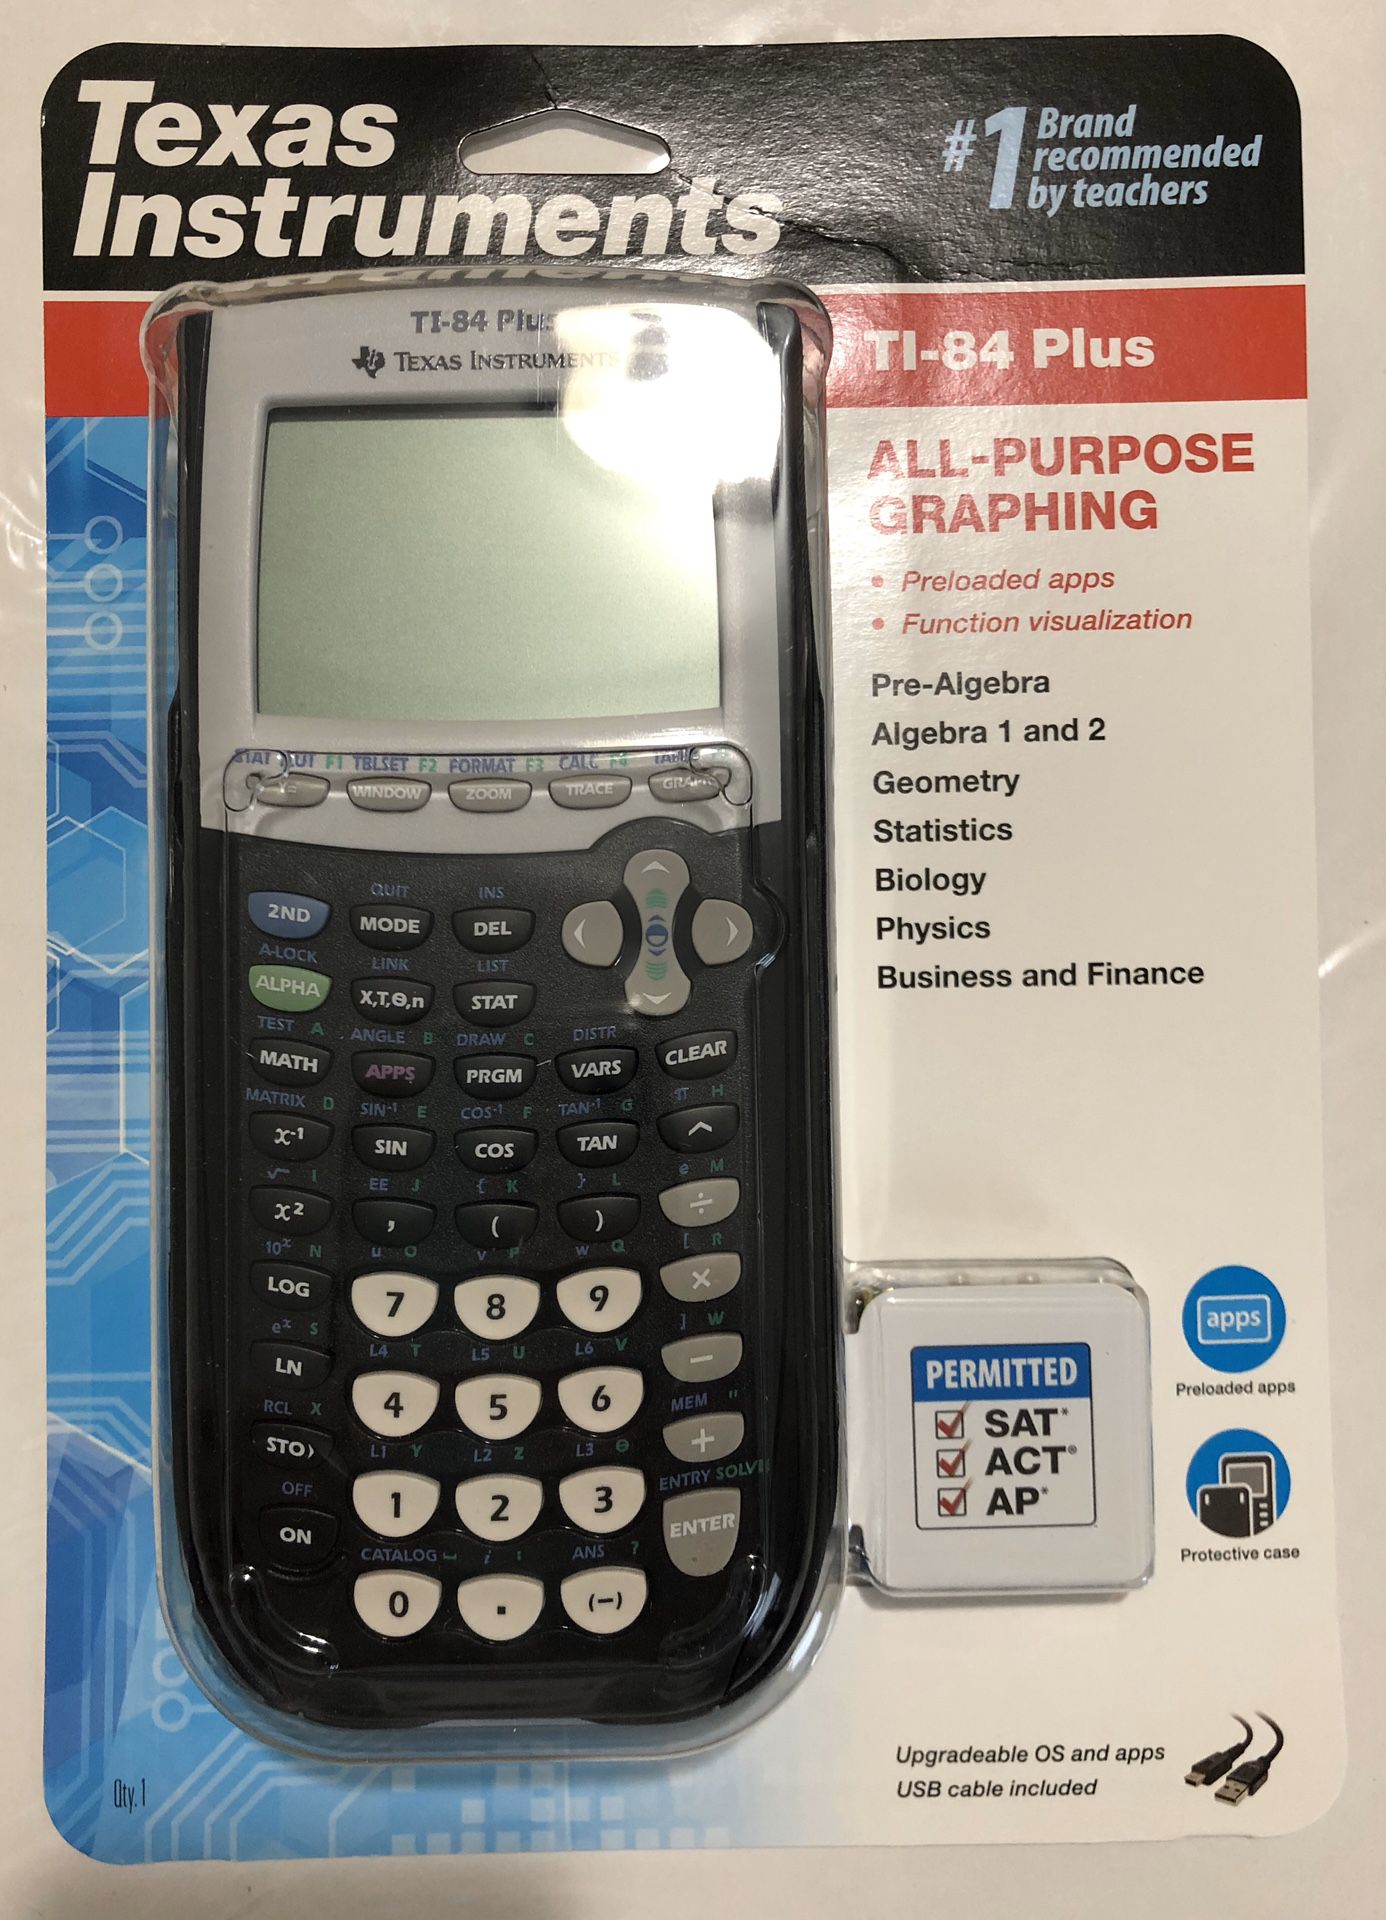 BRAND NEW! Texas Instruments TI-84 Plus Graphing Calculator, Black